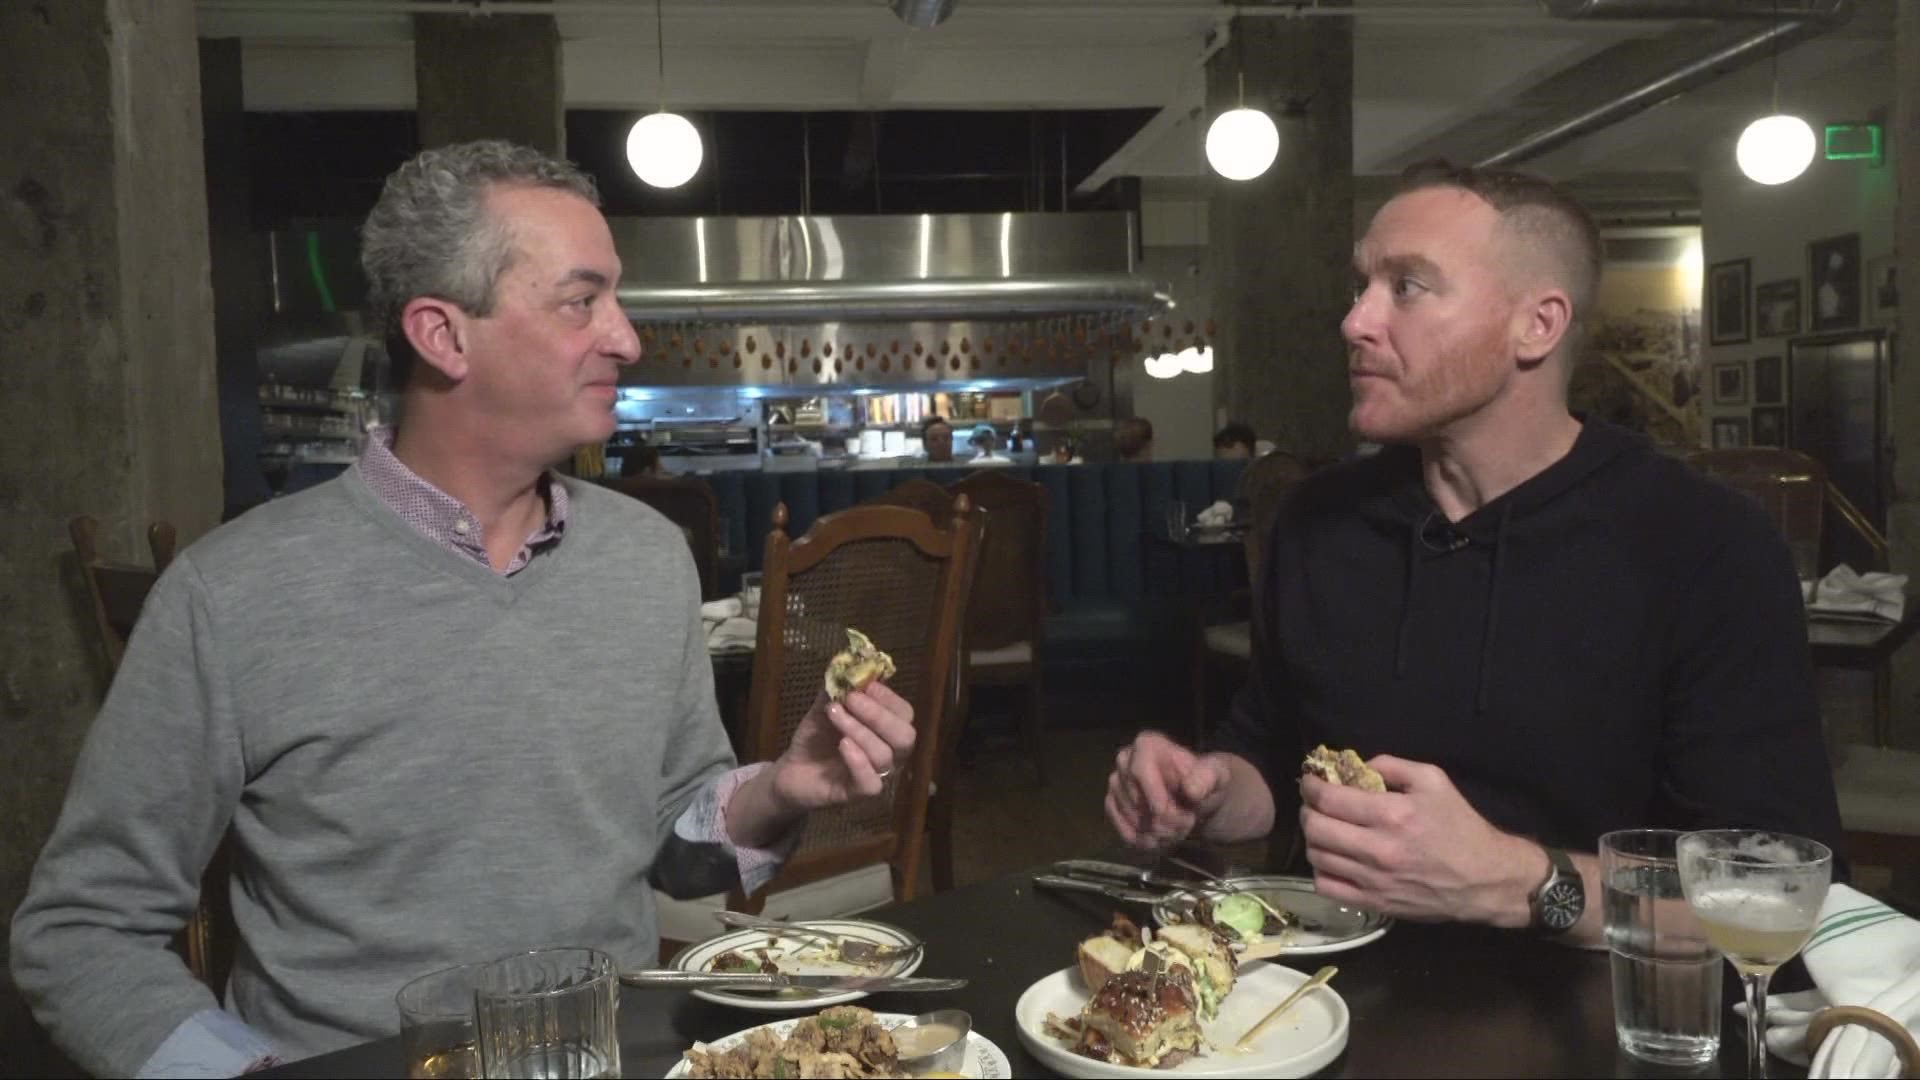 Mike Polk Jr. and Doug Trattner return to East 4th Street in Cleveland for some food, drink, and a little trivia.